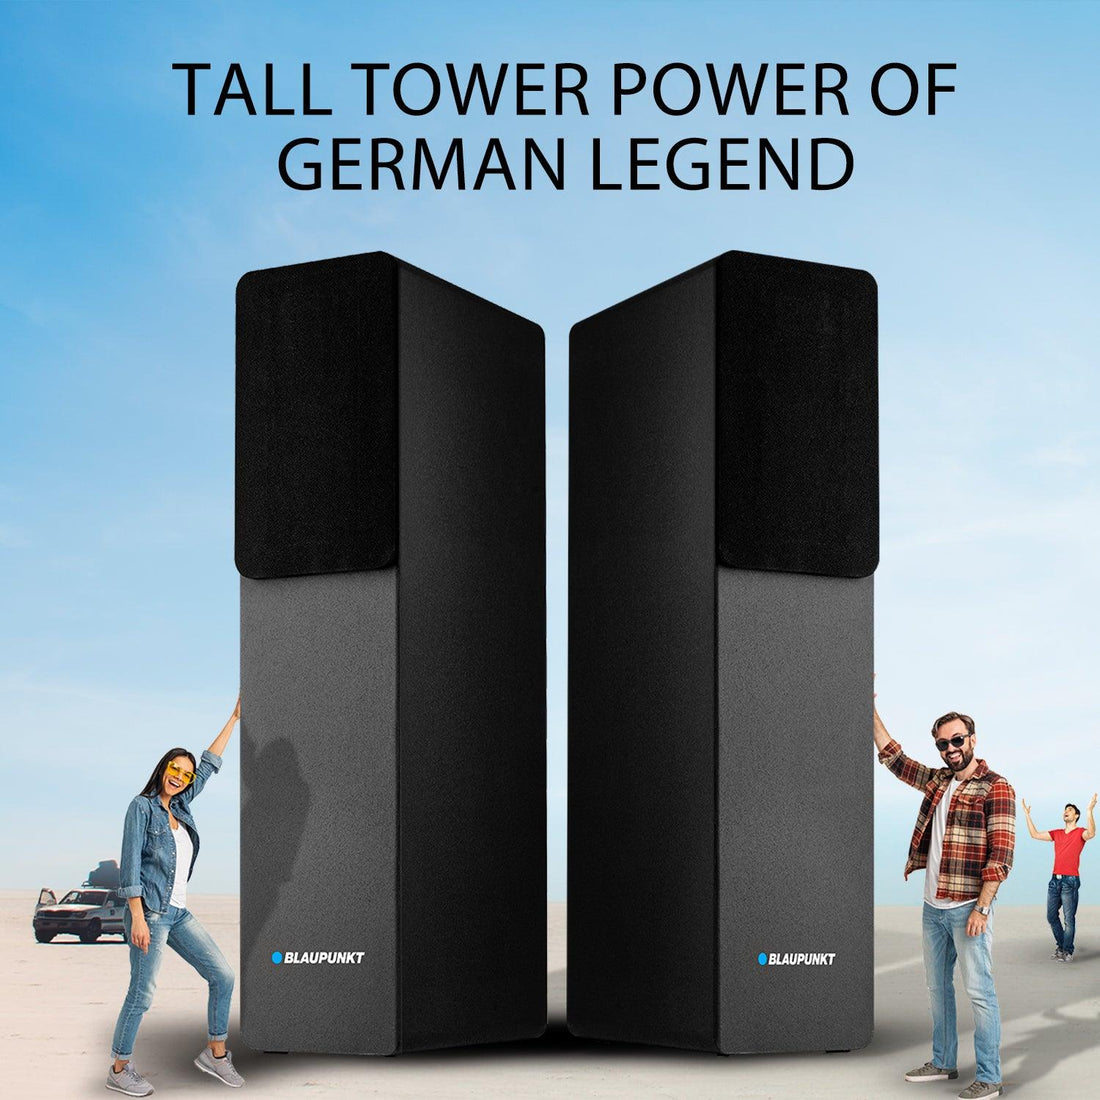 Your level of entertainment just got higher. Presenting the new Blaupunkt TS120 Tower Speaker. - Blaupunkt India